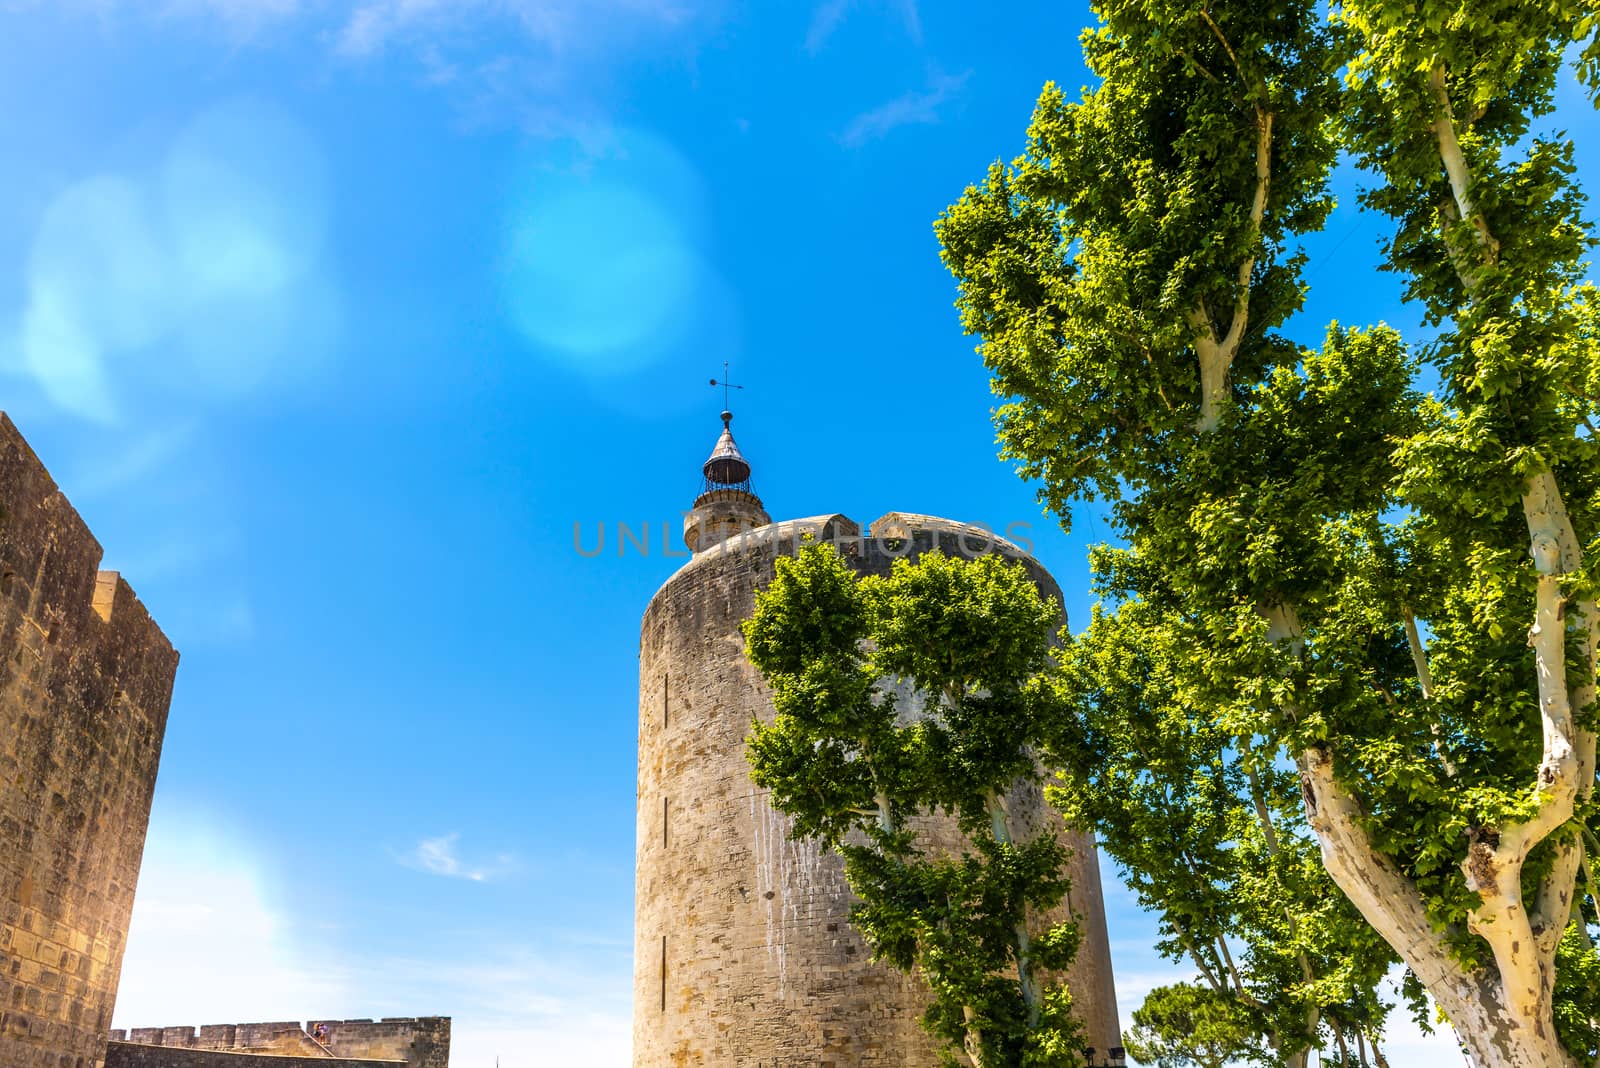 The Tour de Constance was erected from 1242 in Aigues-Mortes, by Saint Louis, on the former site of the Tour Matafère, built by Charlemagne around 790.